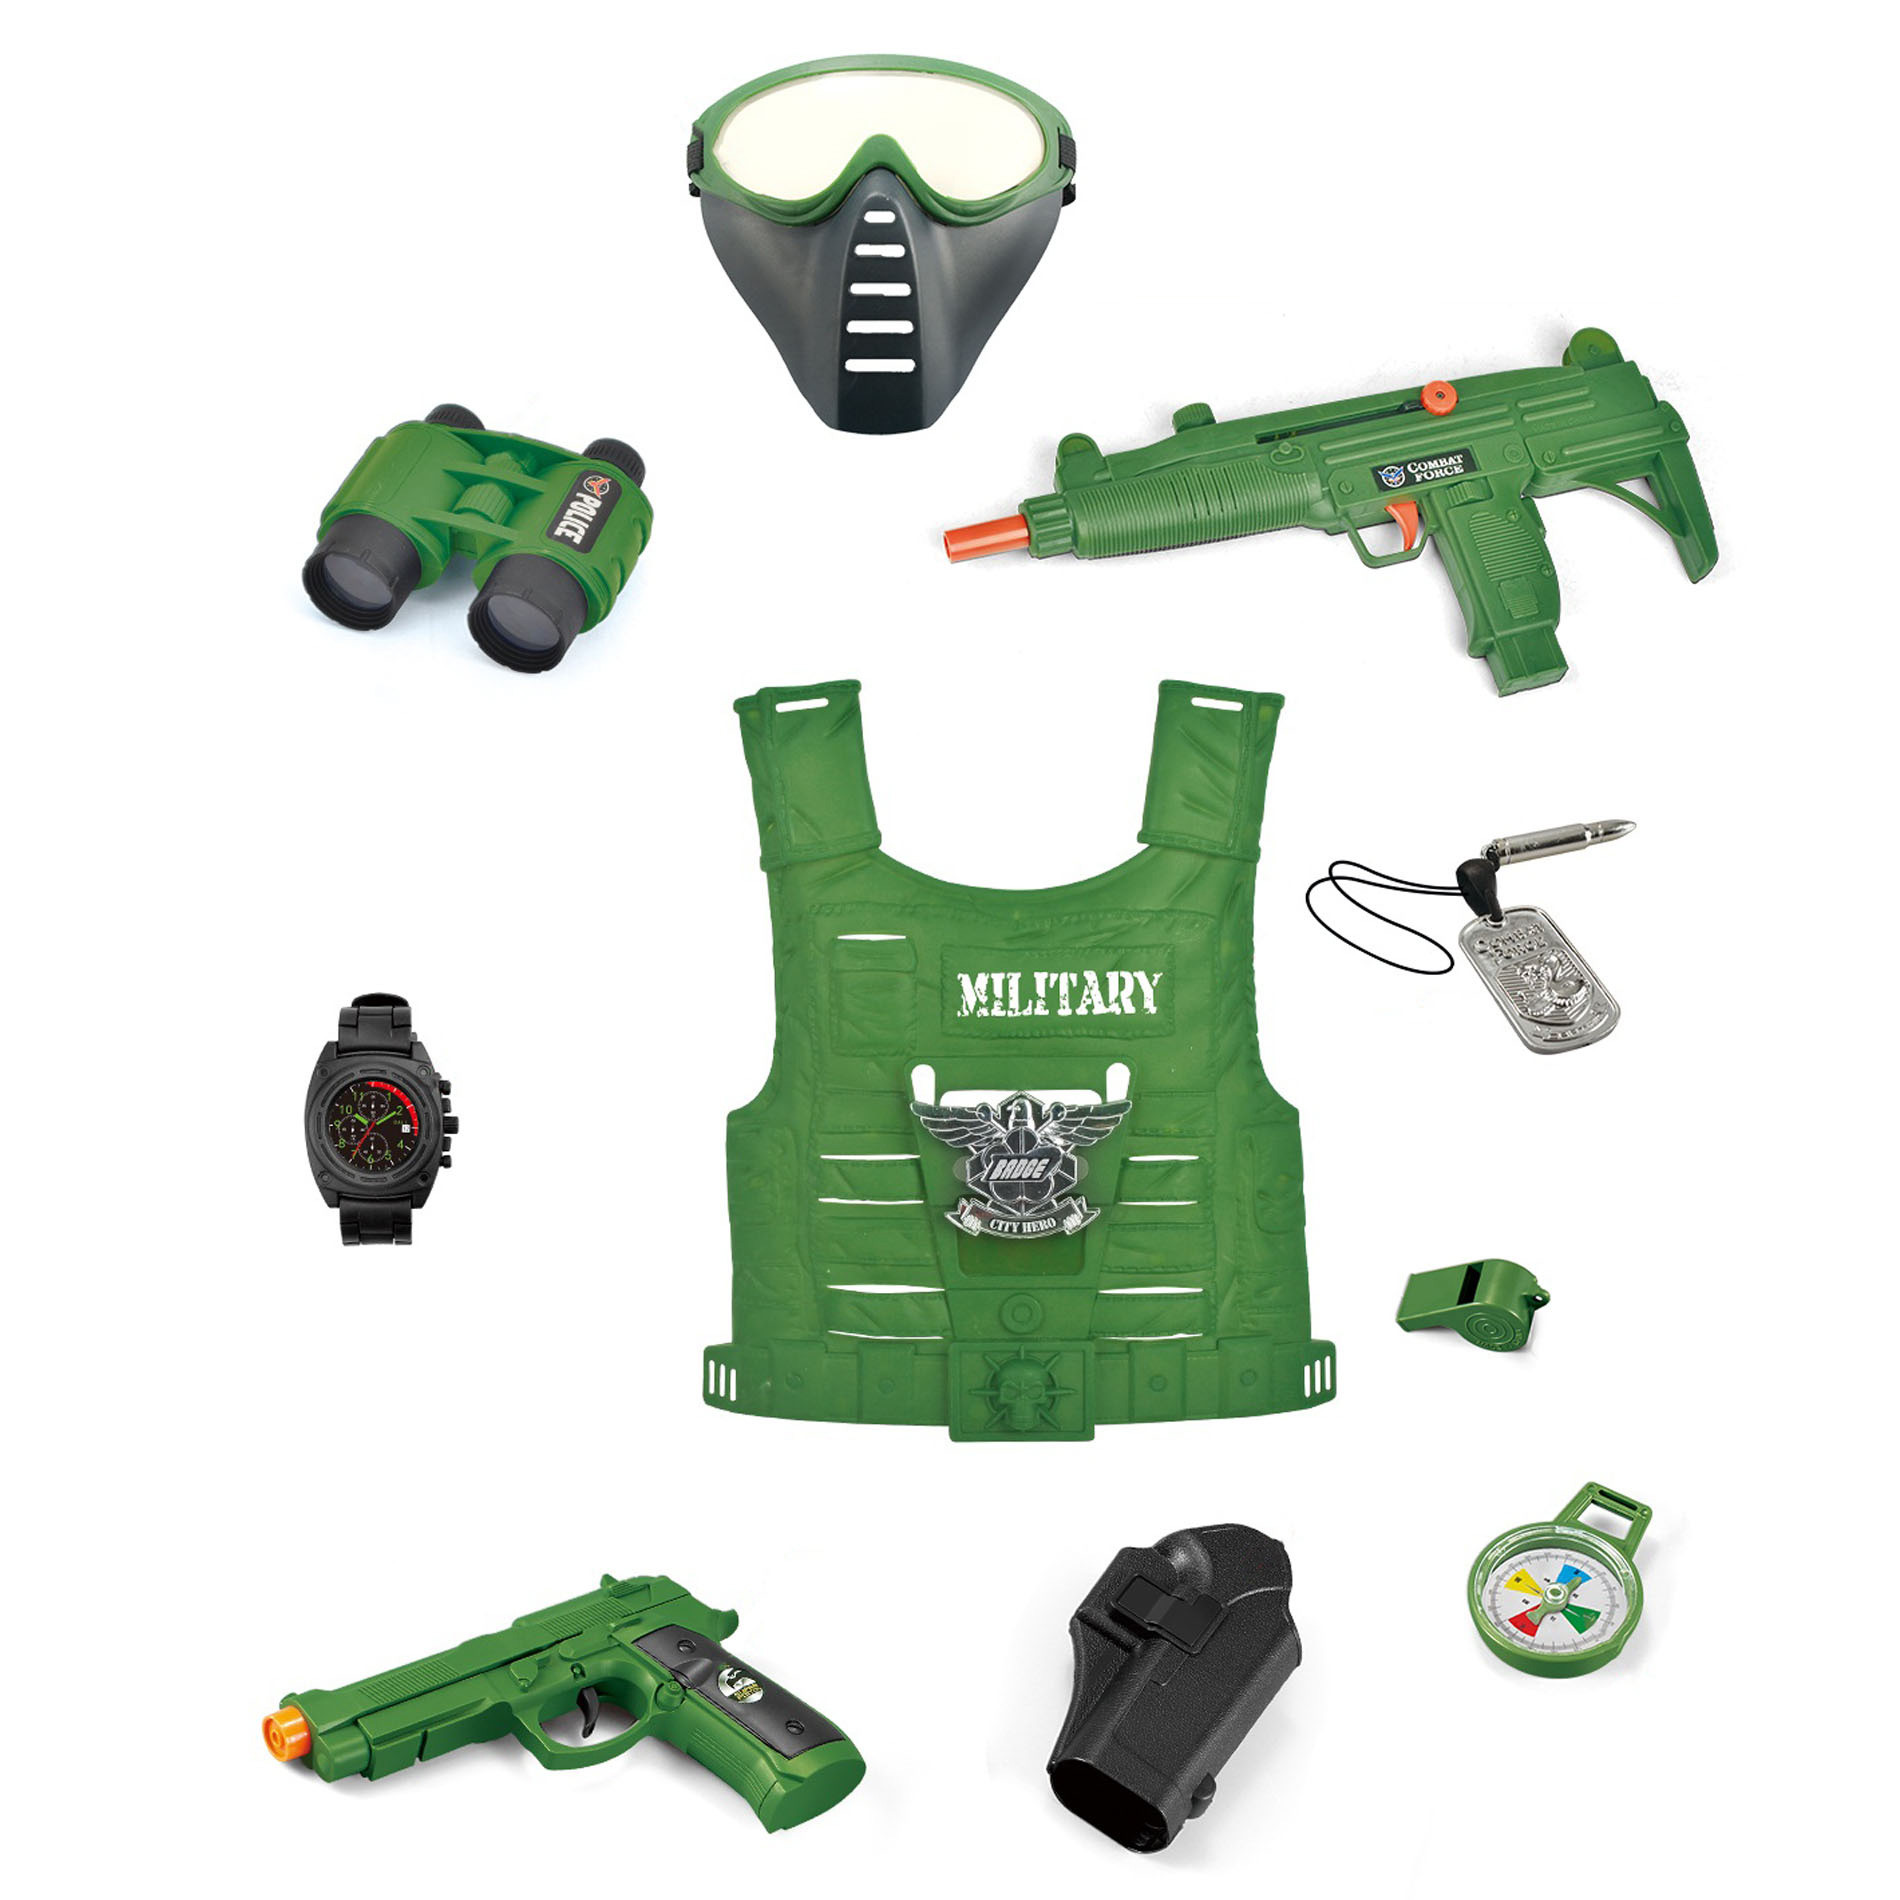 Military set with accessories